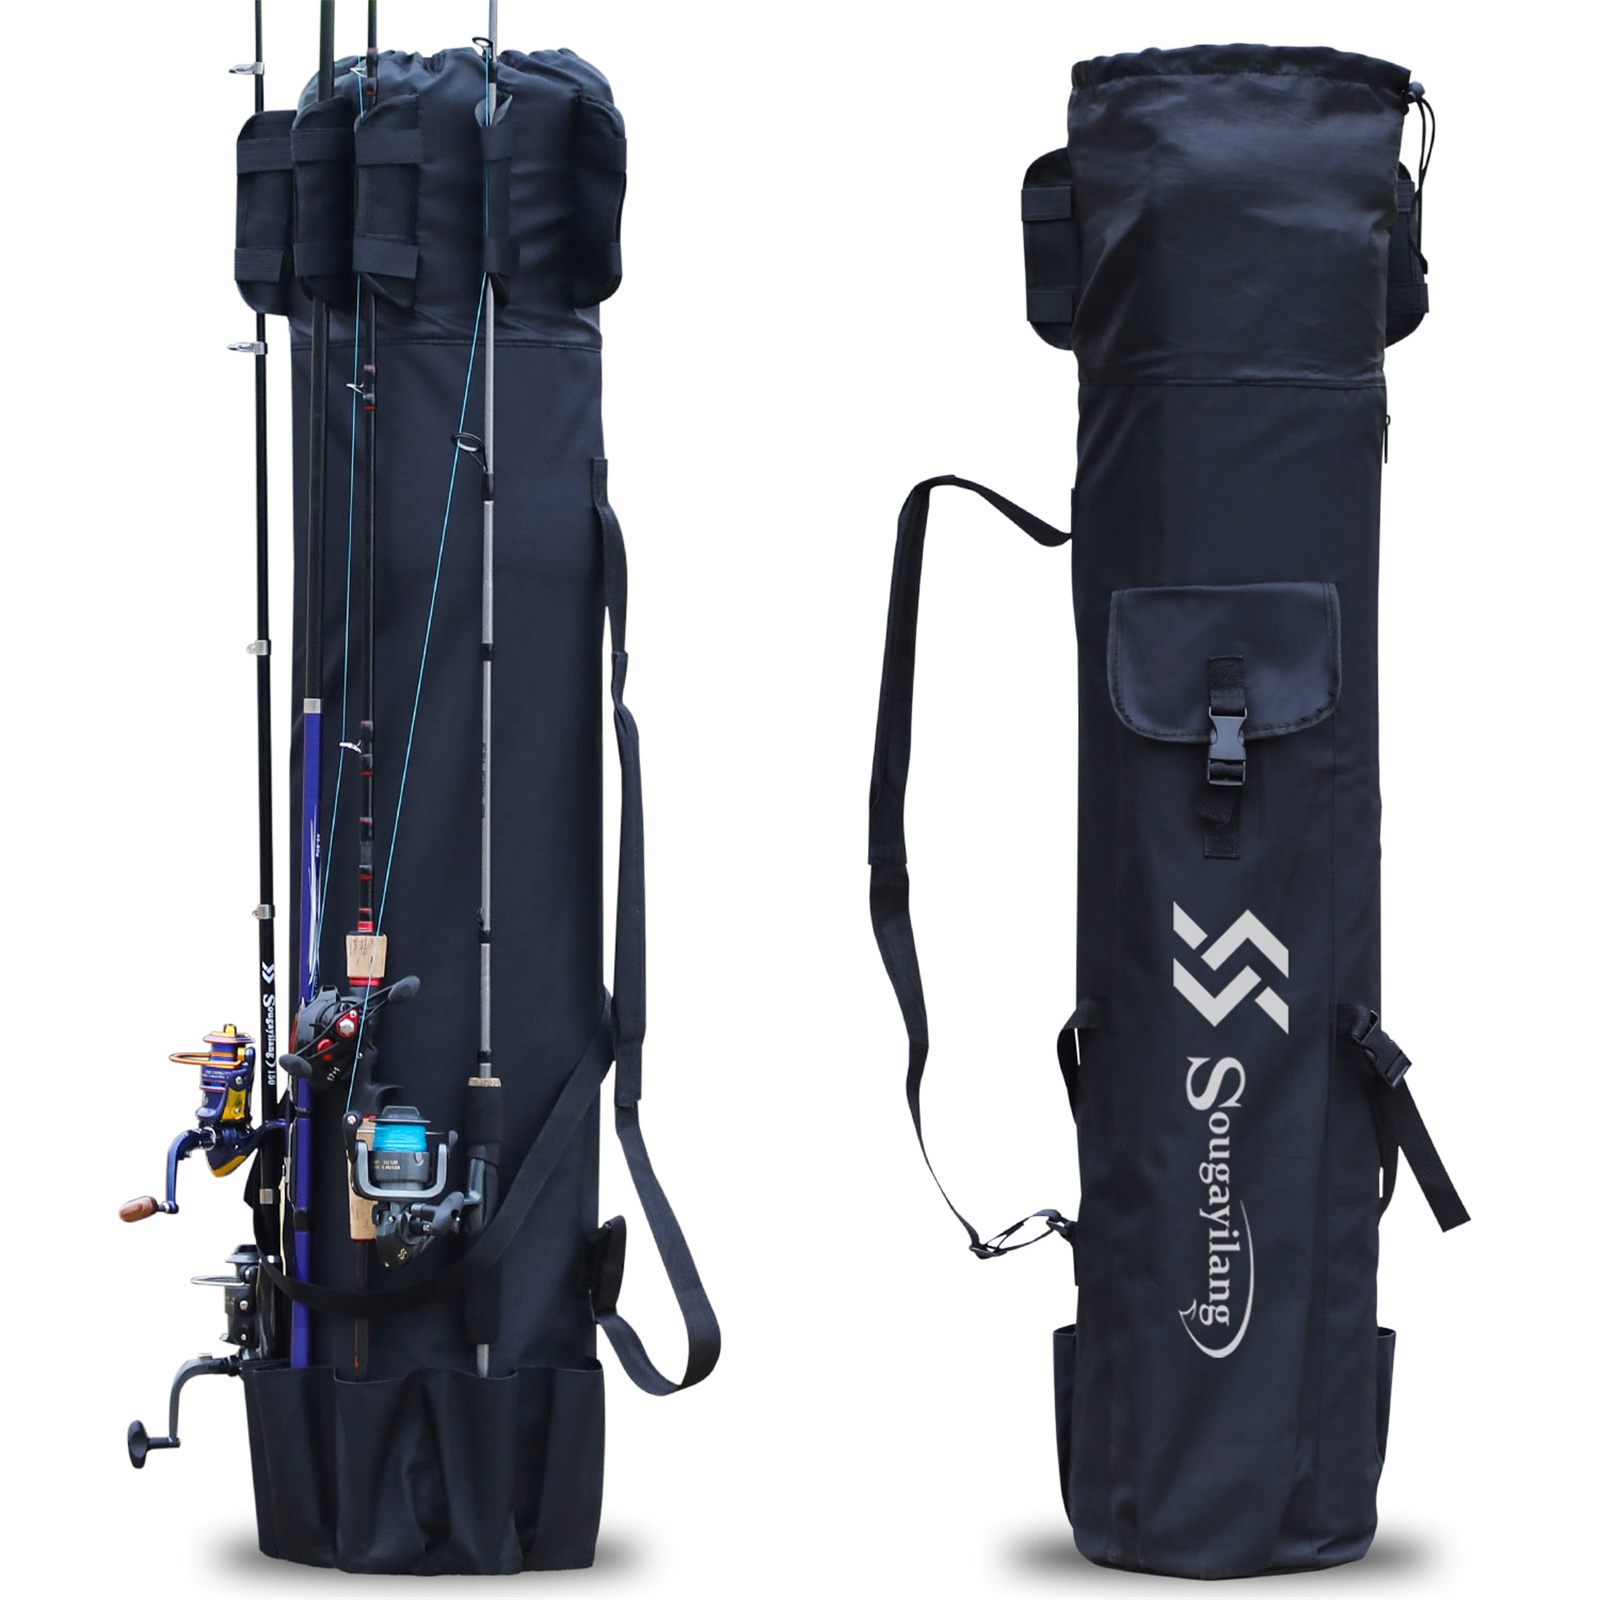 THE STYLE SUTRA Fishing Rod Carrier Bag Waterproof Fishing Pole